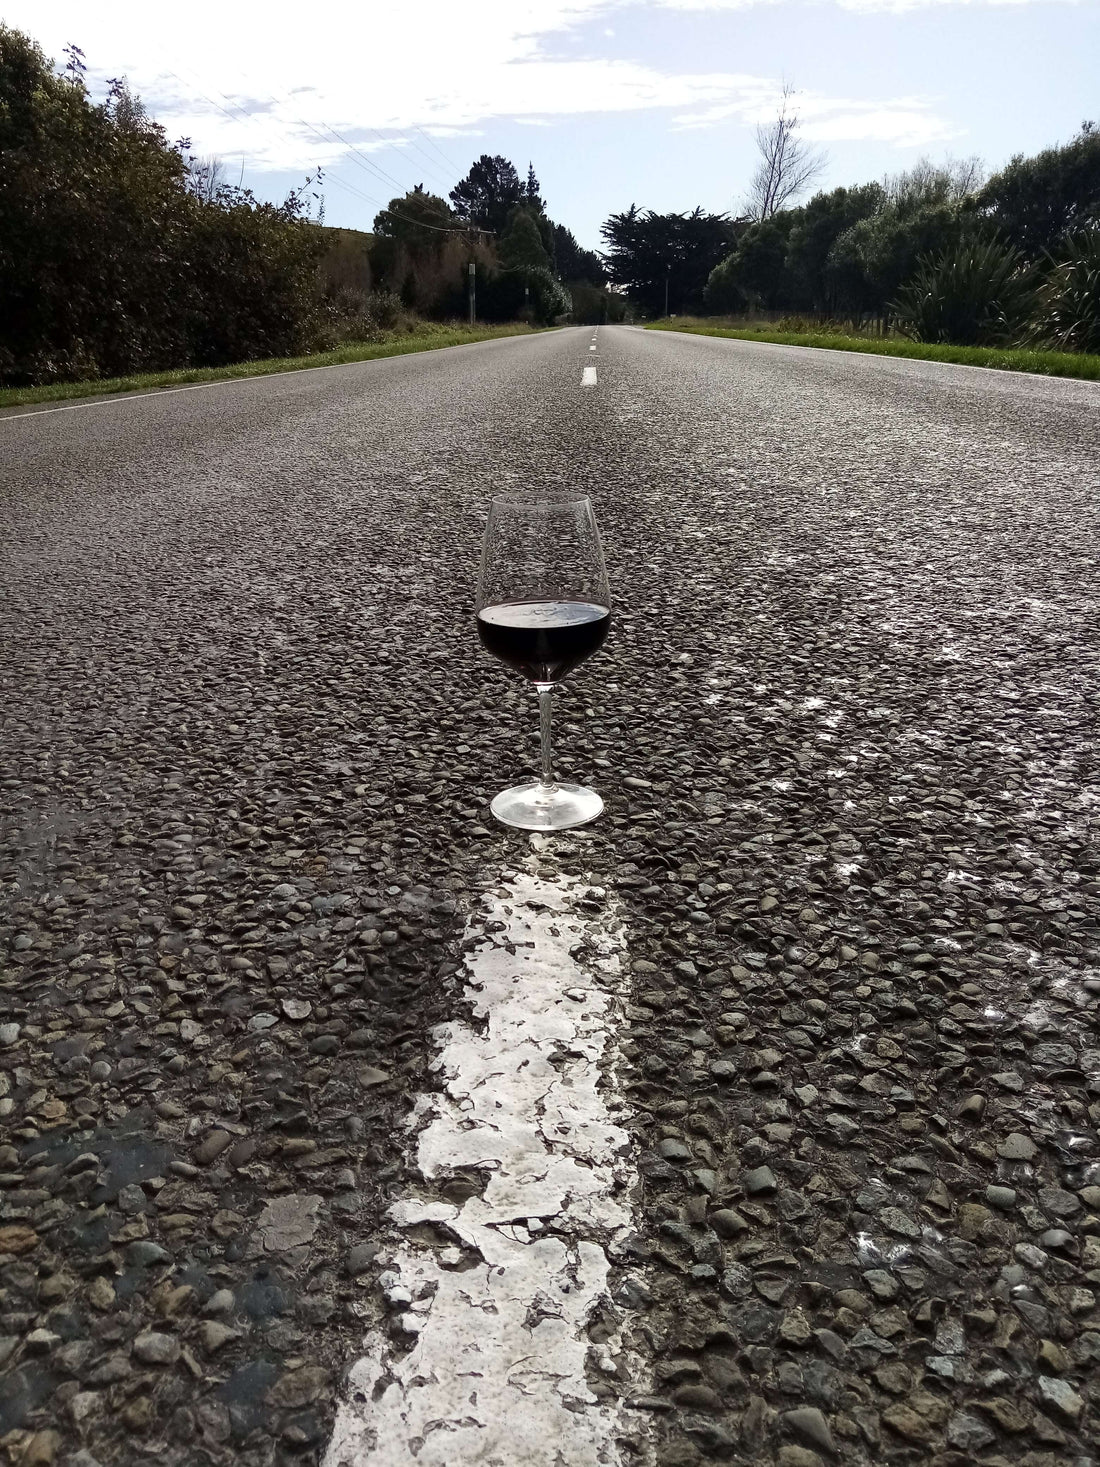 Wine on a road. How to get on the road in becoming a legit winemaker